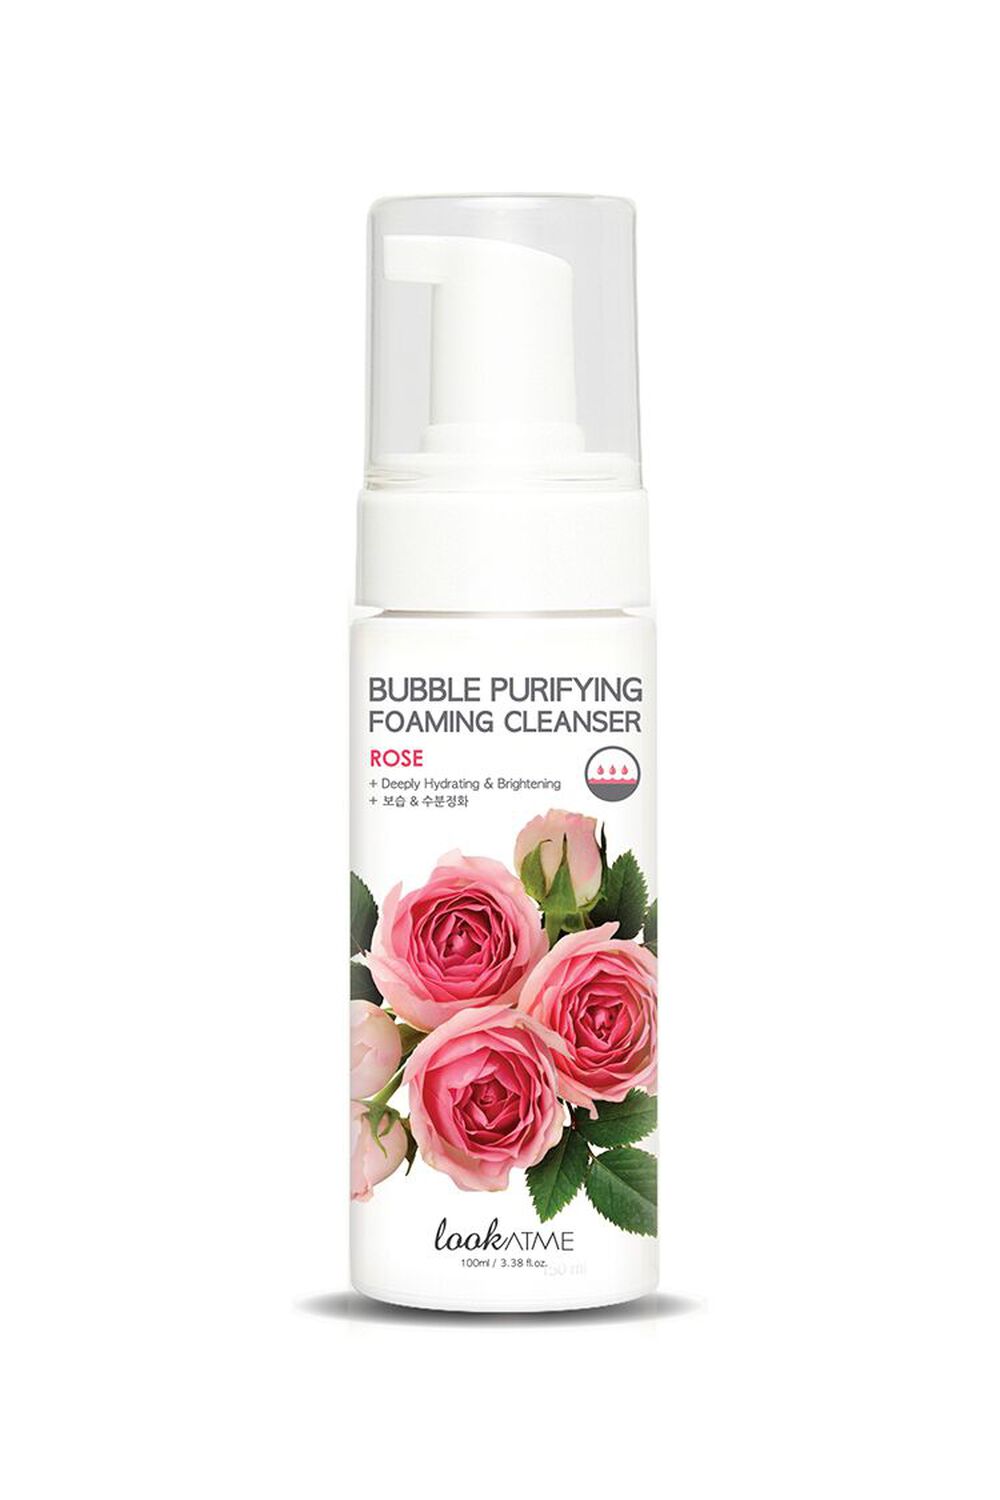 LookAtMe Bubble Purifying Foaming Cleanser Rose, image 1